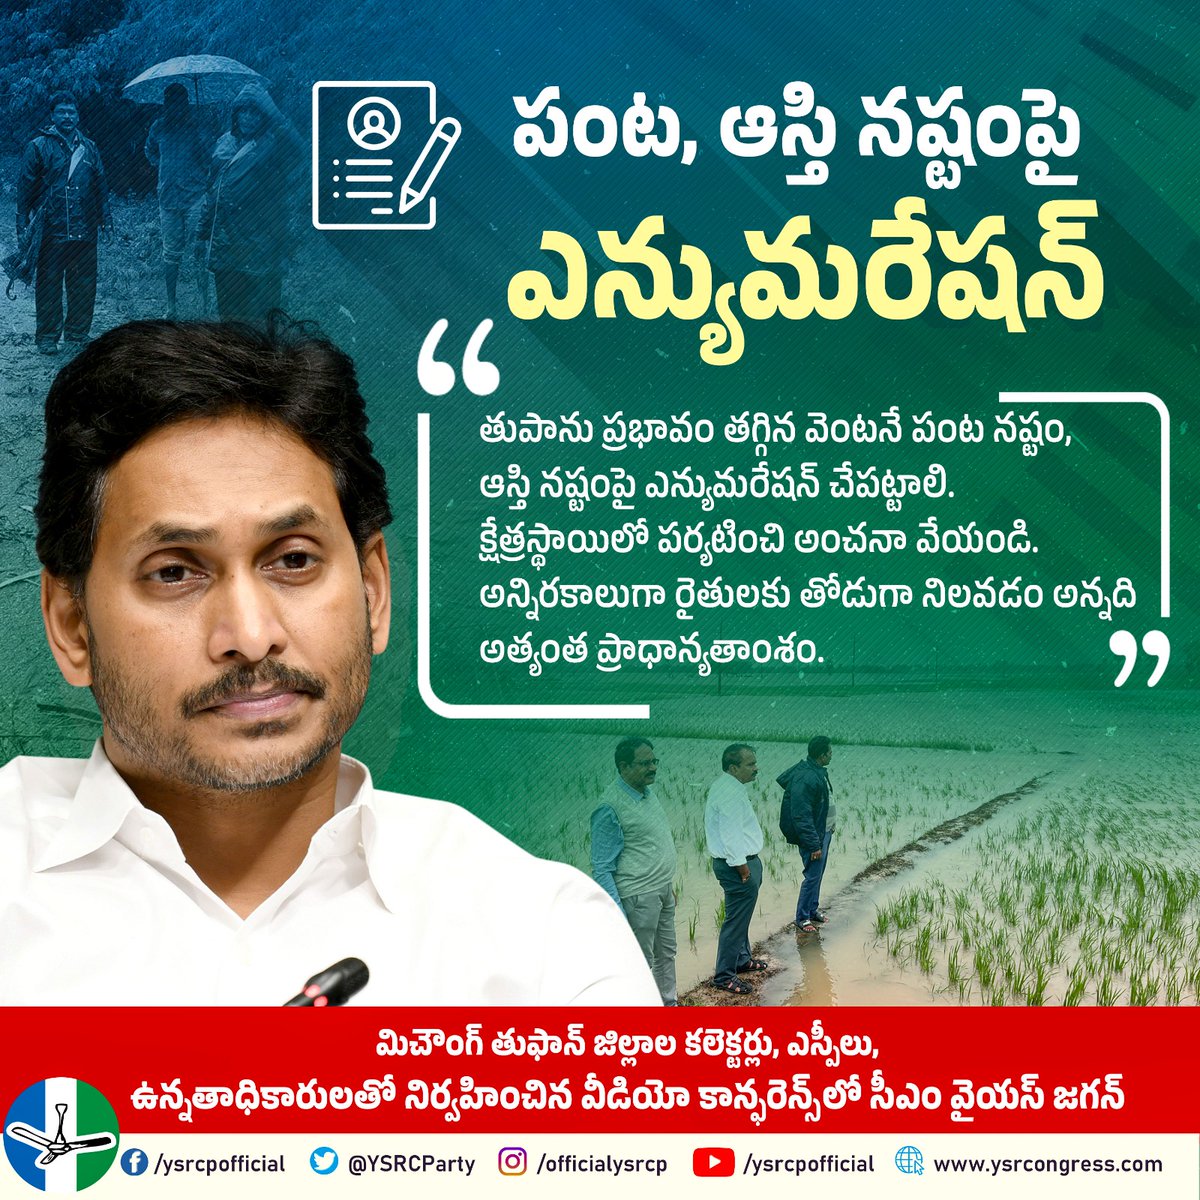 YSRCParty tweet picture